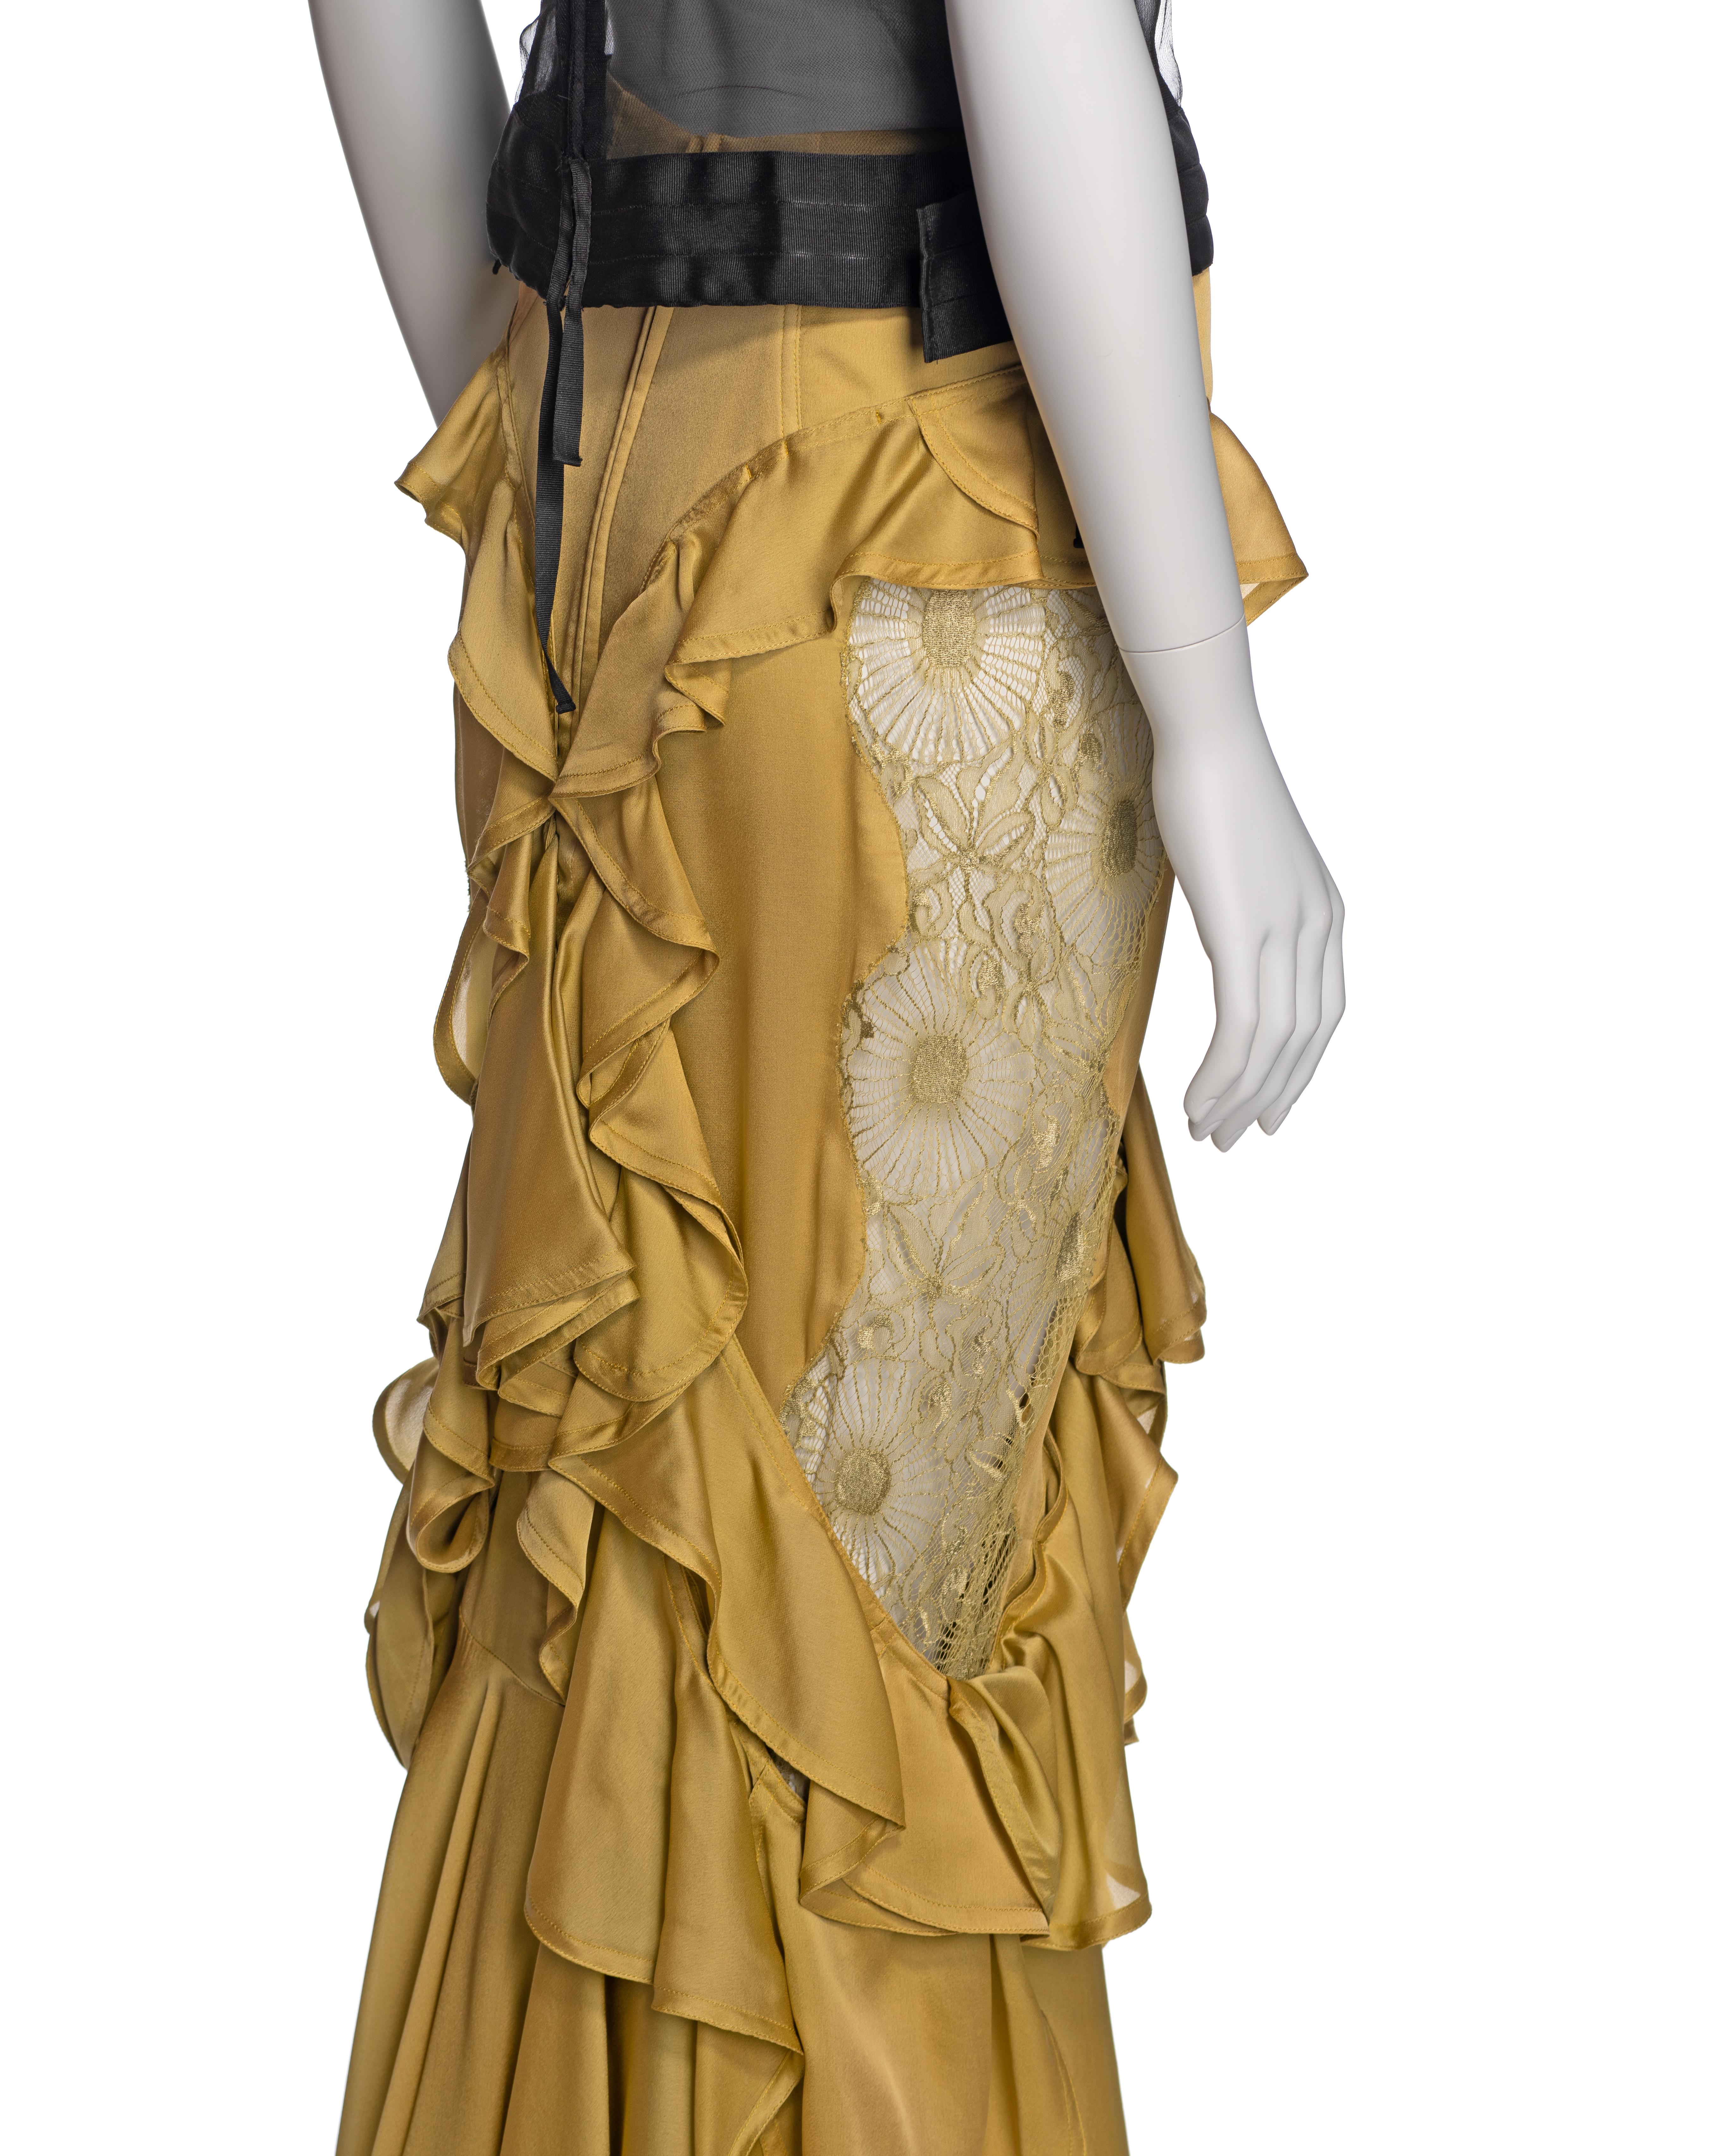 Yves Saint Laurent by Tom Ford Embellished Top and Silk Skirt Ensemble, FW 2003 7